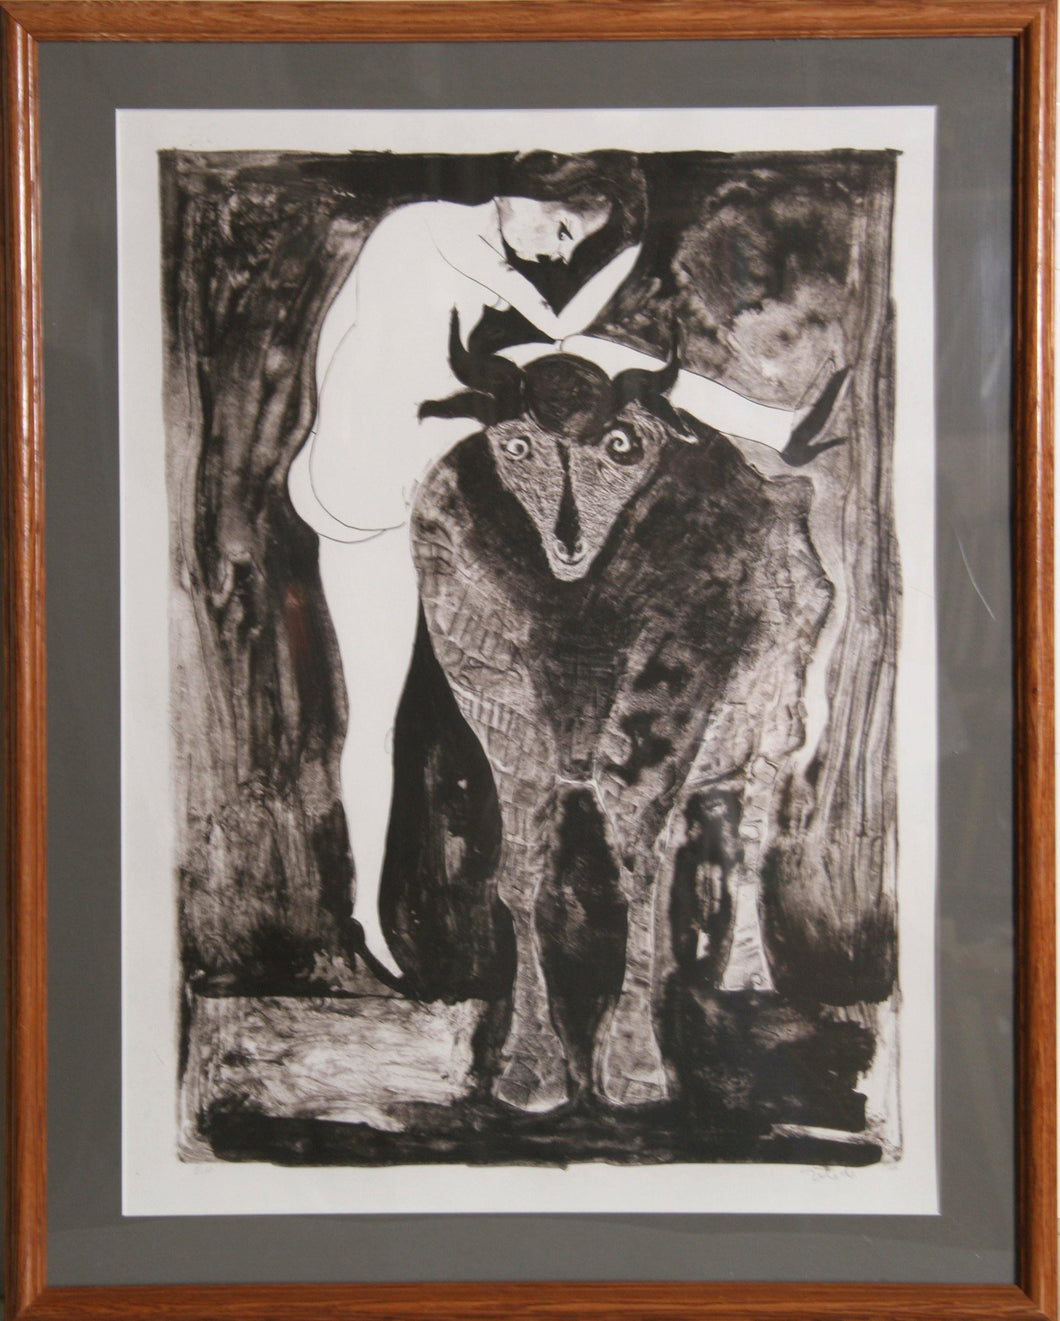 Woman with Goat Lithograph | Francisco Toledo,{{product.type}}